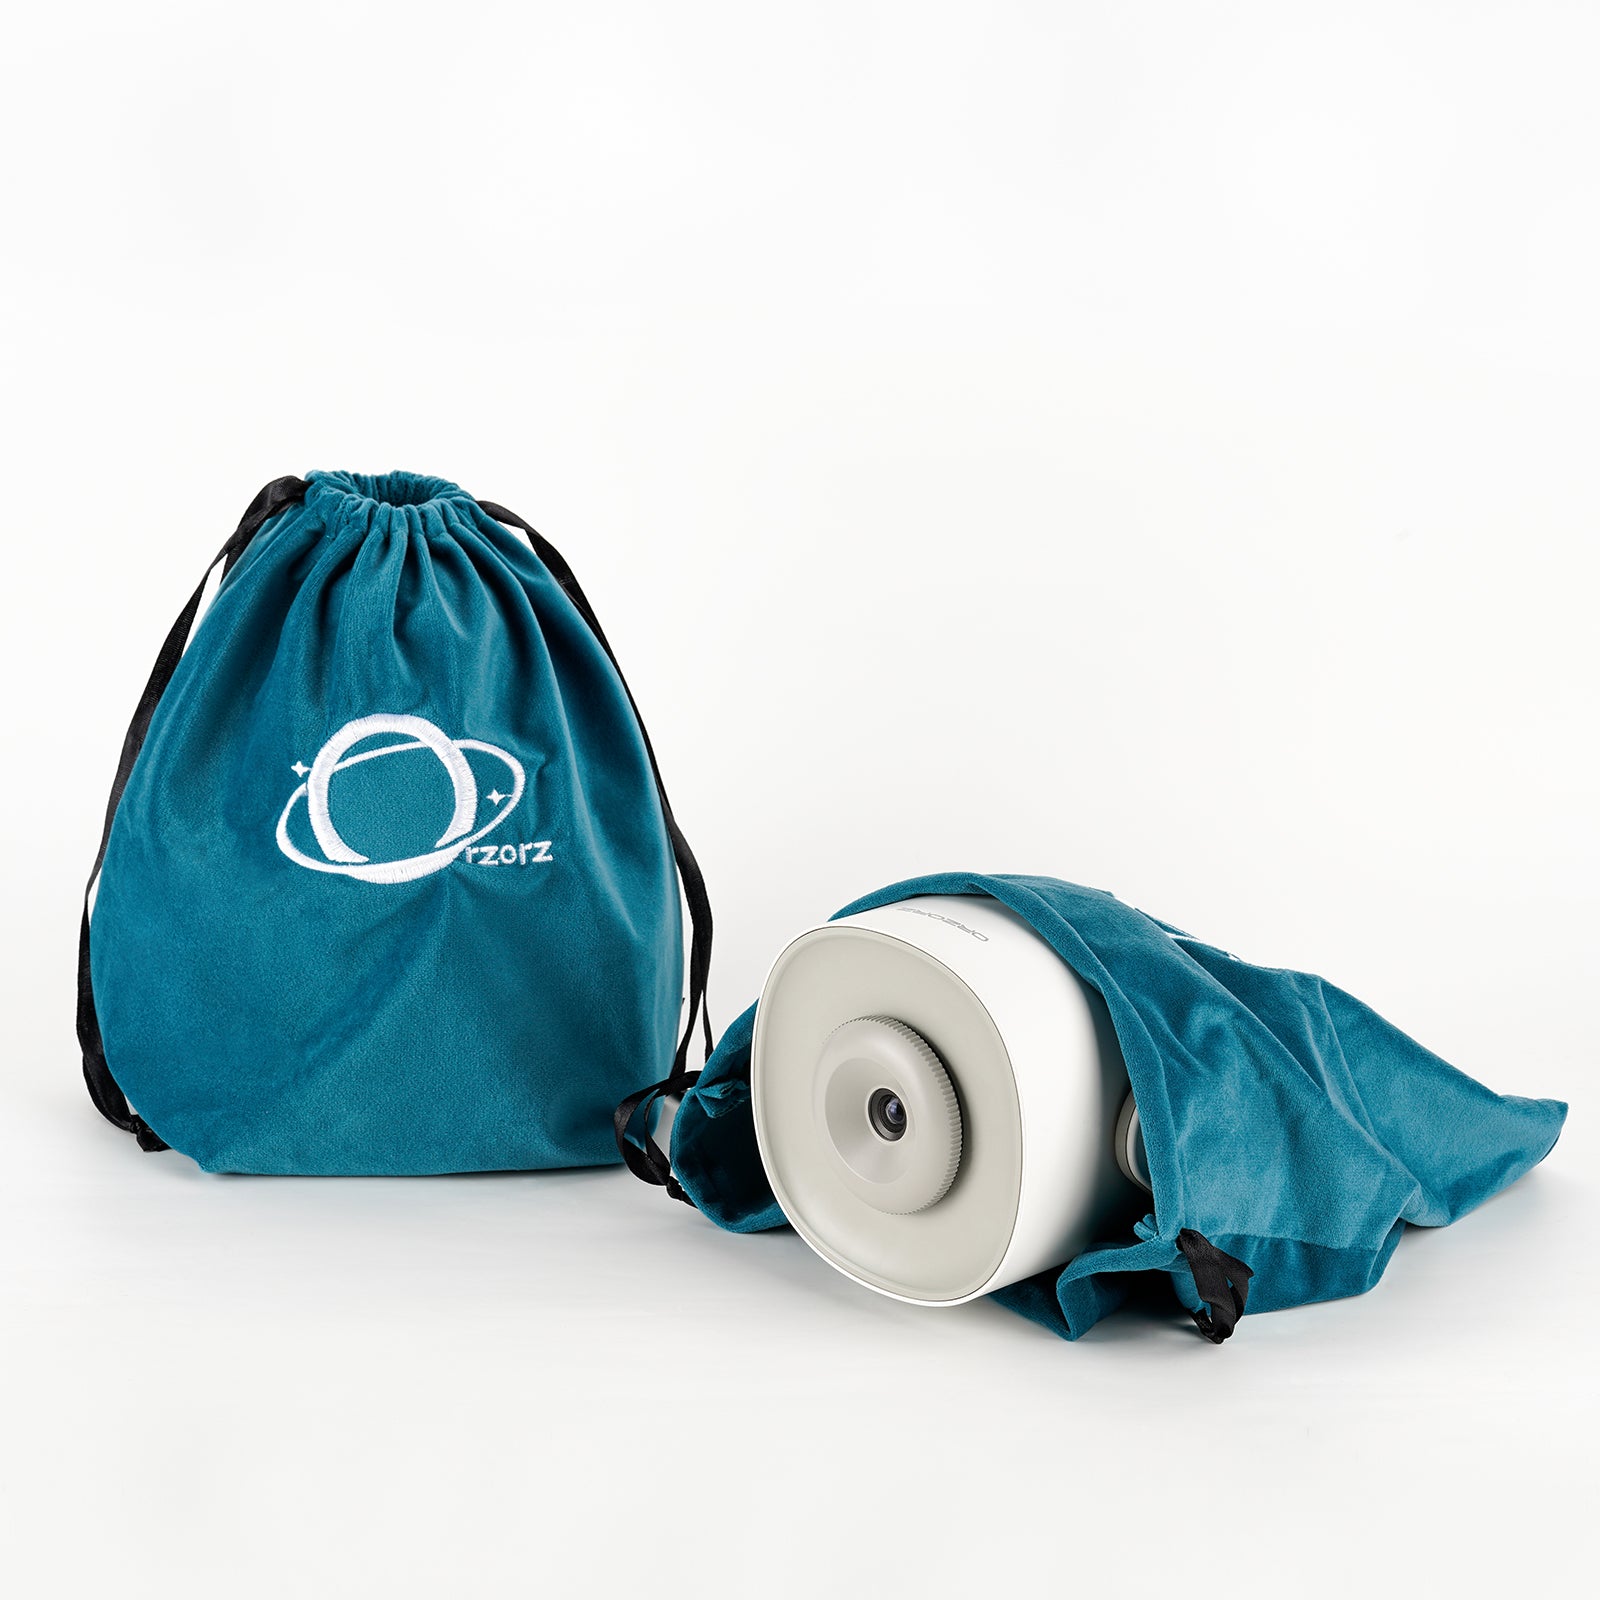 Orzorz dust cover storage bag - Orzorzvip